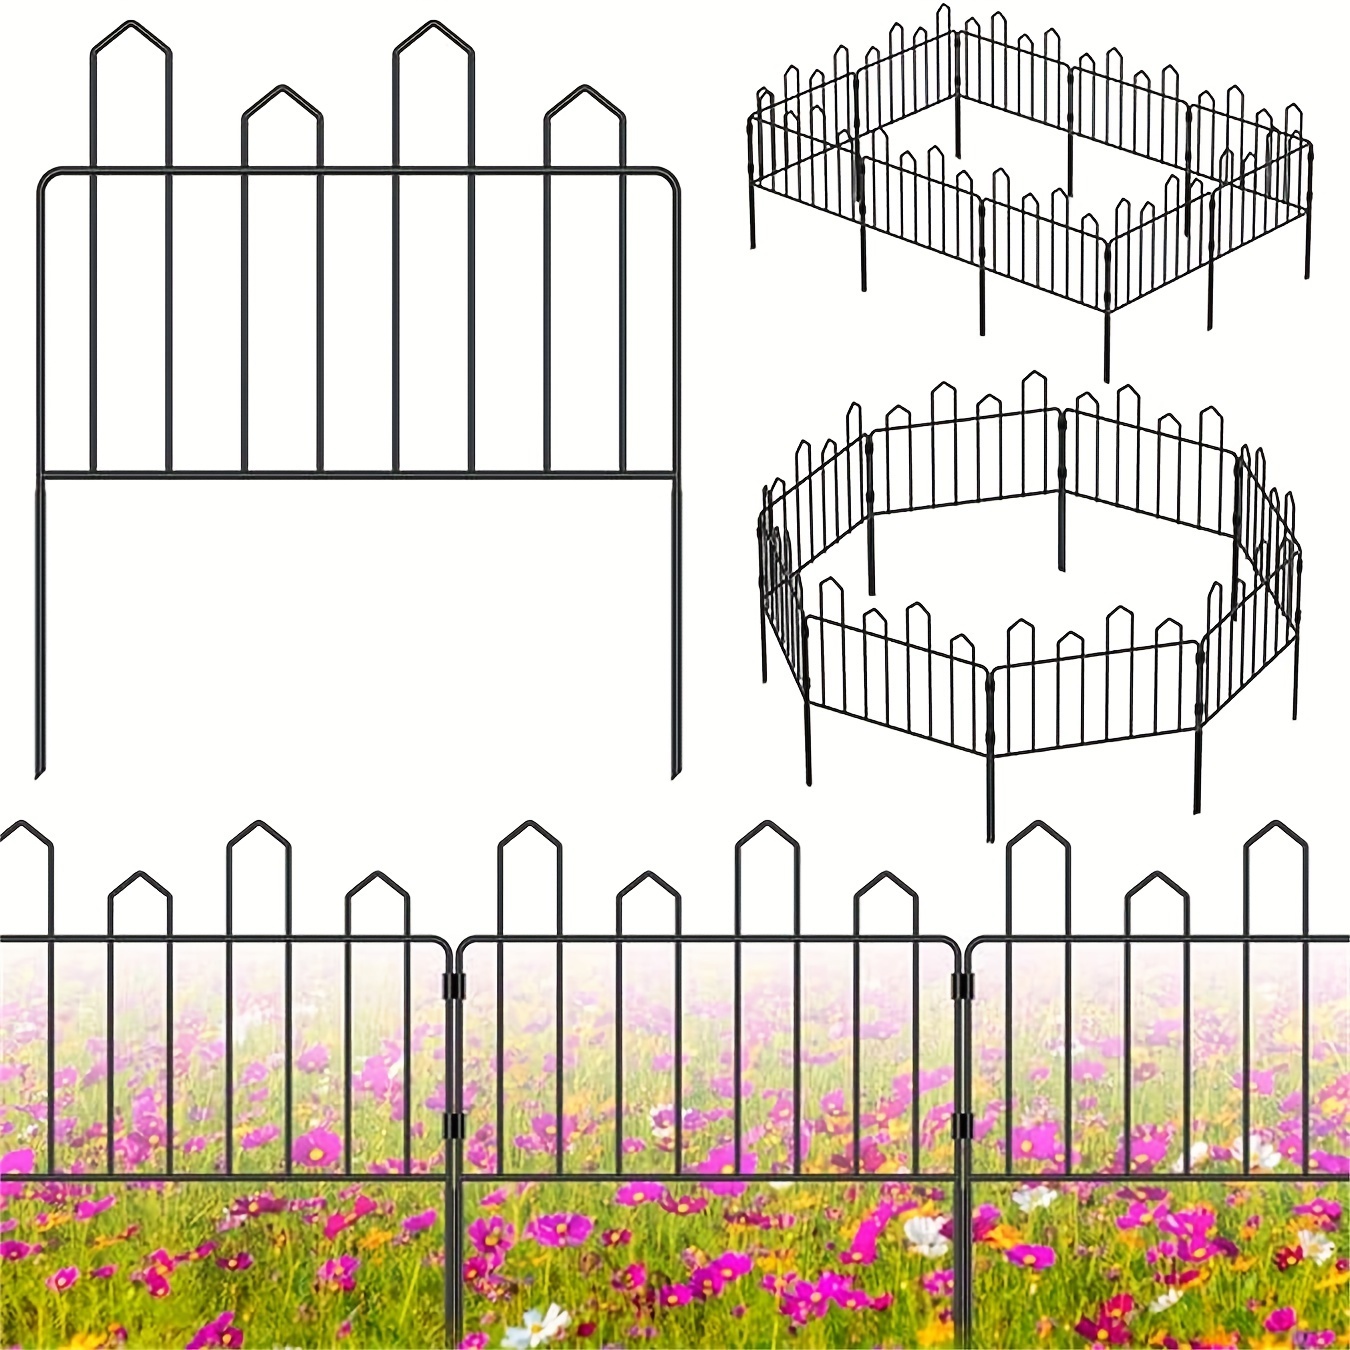 

Decorative Garden Fence Outdoor Black Metal Wire Fence Border 18 Panel 19.5in (h)*26ft (l) For Yard Small Flower Bed Garden Fencing No Dig Animal Barrier Fence Edging For Lawn Patio Park, Arched